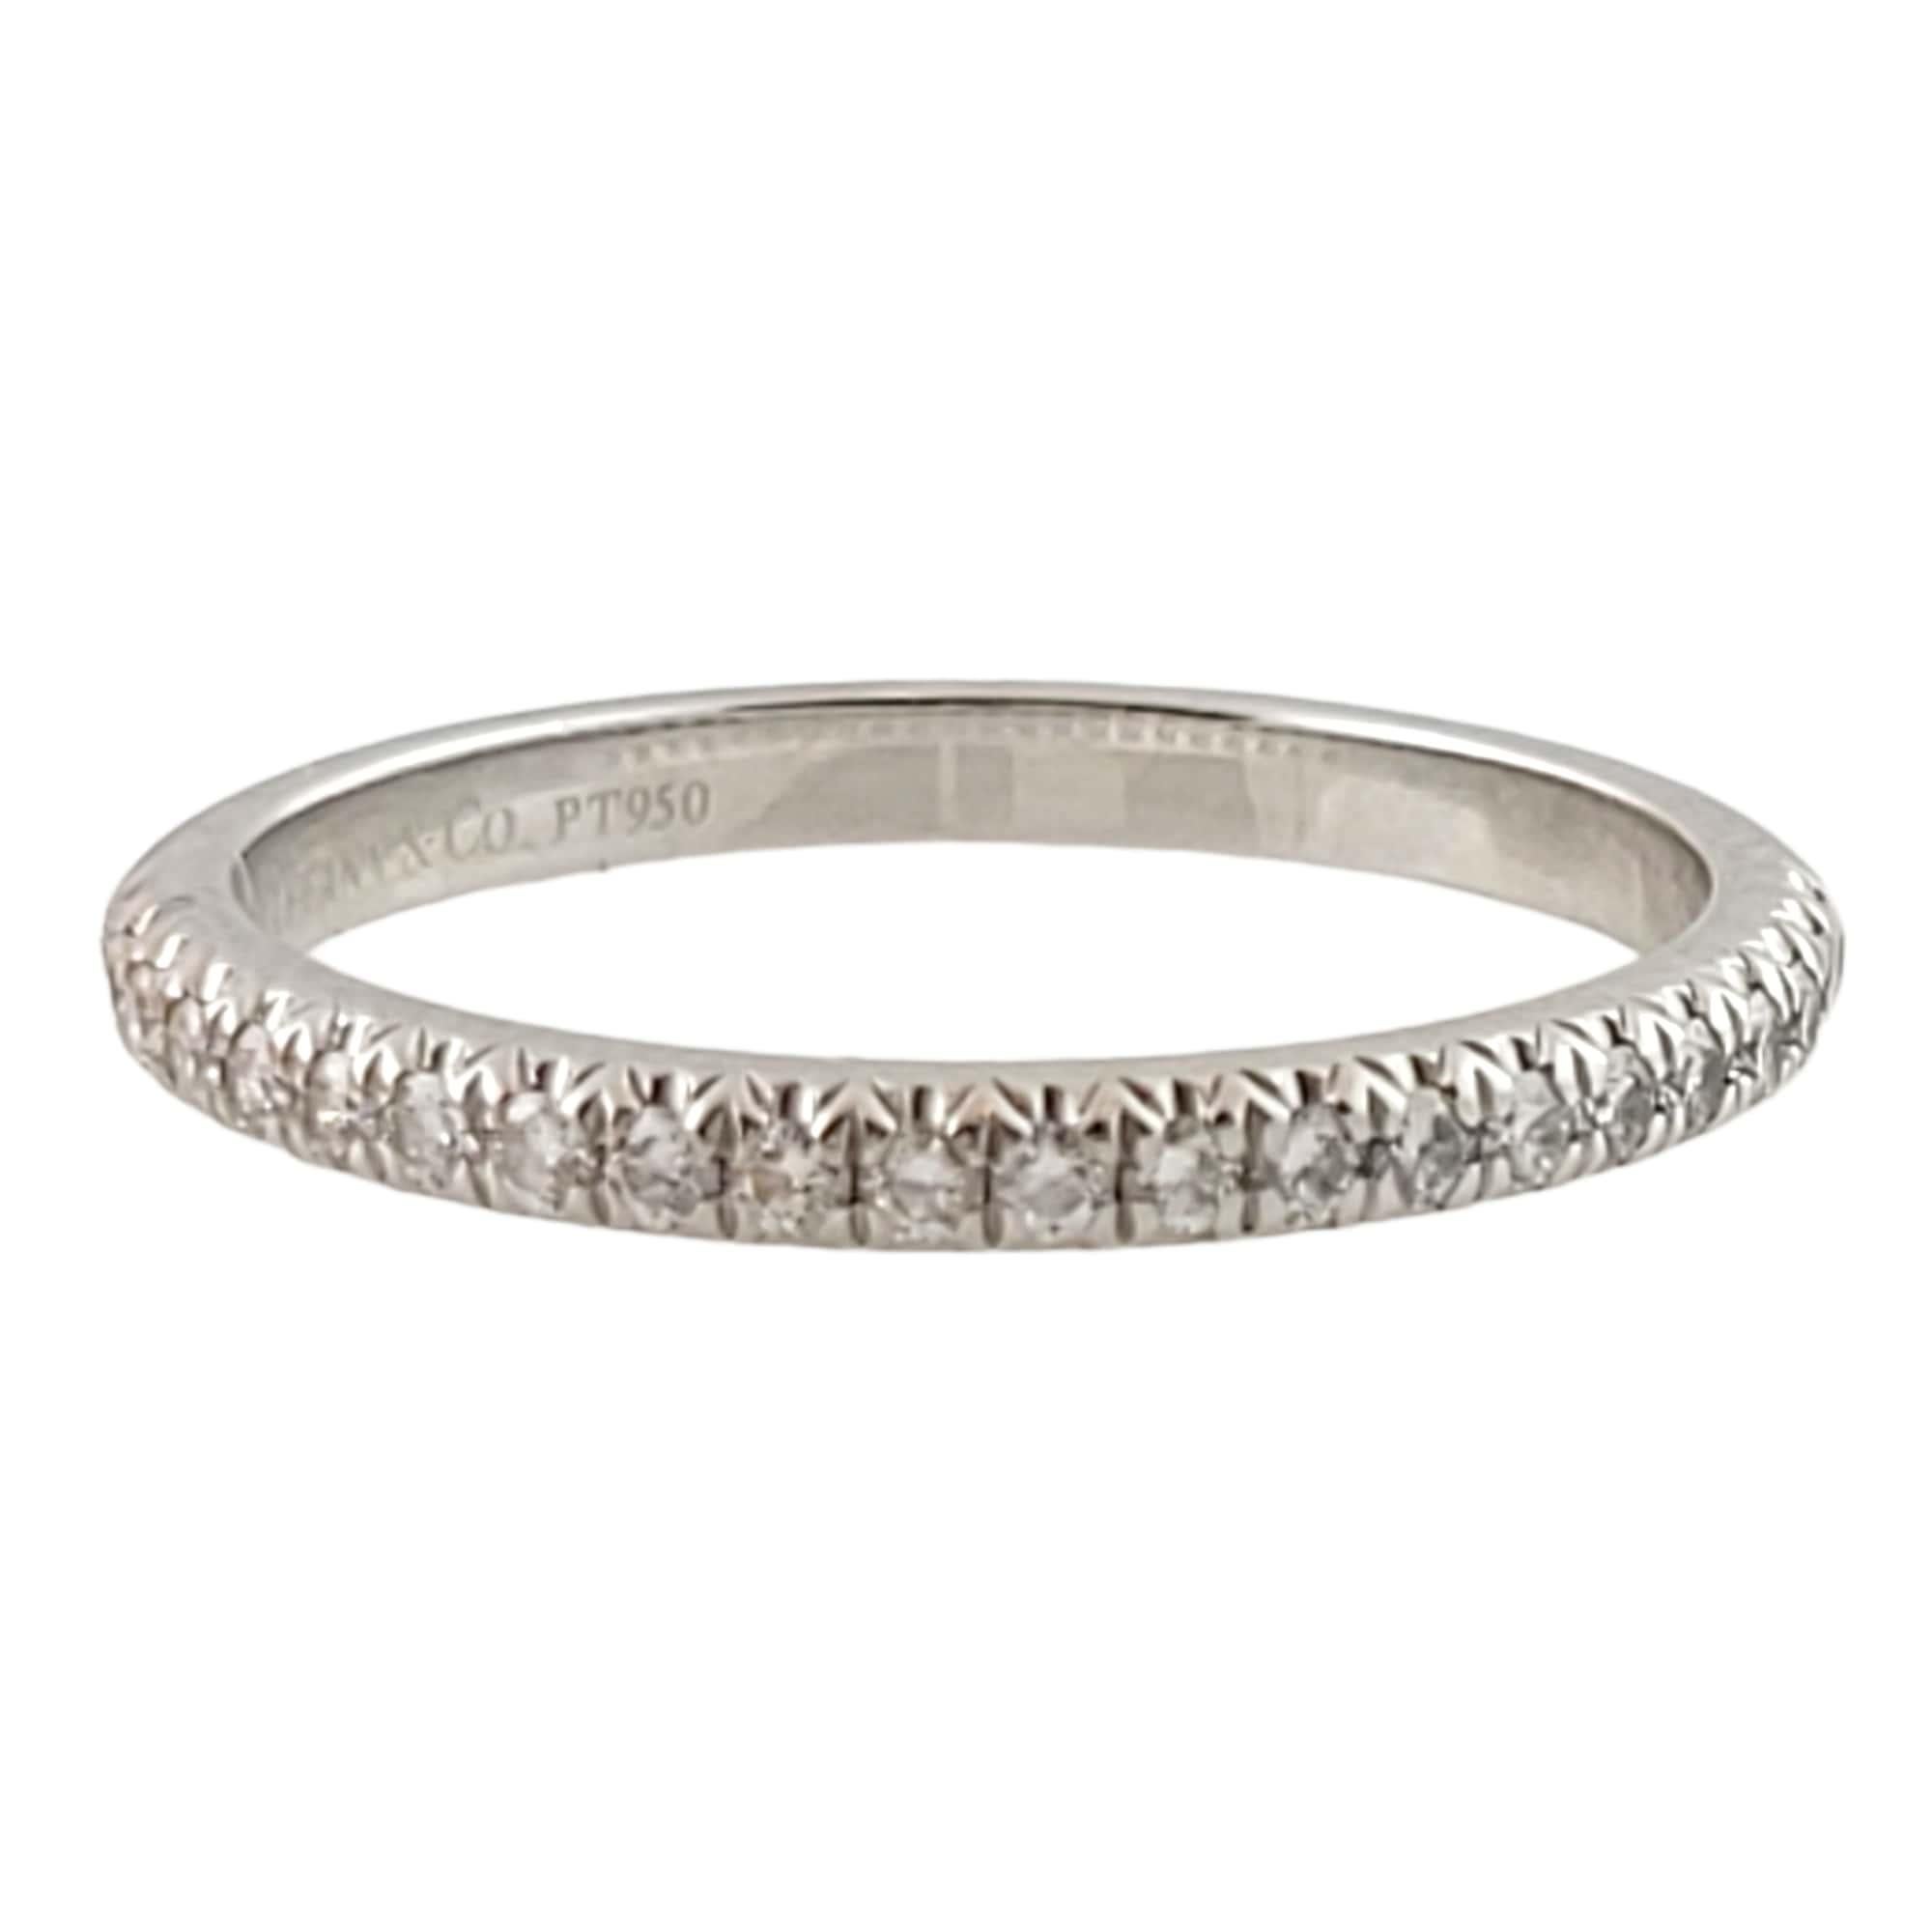 Tiffany & Co. Soleste Platinum Diamond Half Eternity Wedding Band

This classic diamond wedding band is set in platinum and from the Soleste collection by Tiffany & Co. 

Size 6.5

22 round brilliant diamonds are set in this band
Total diamond carat